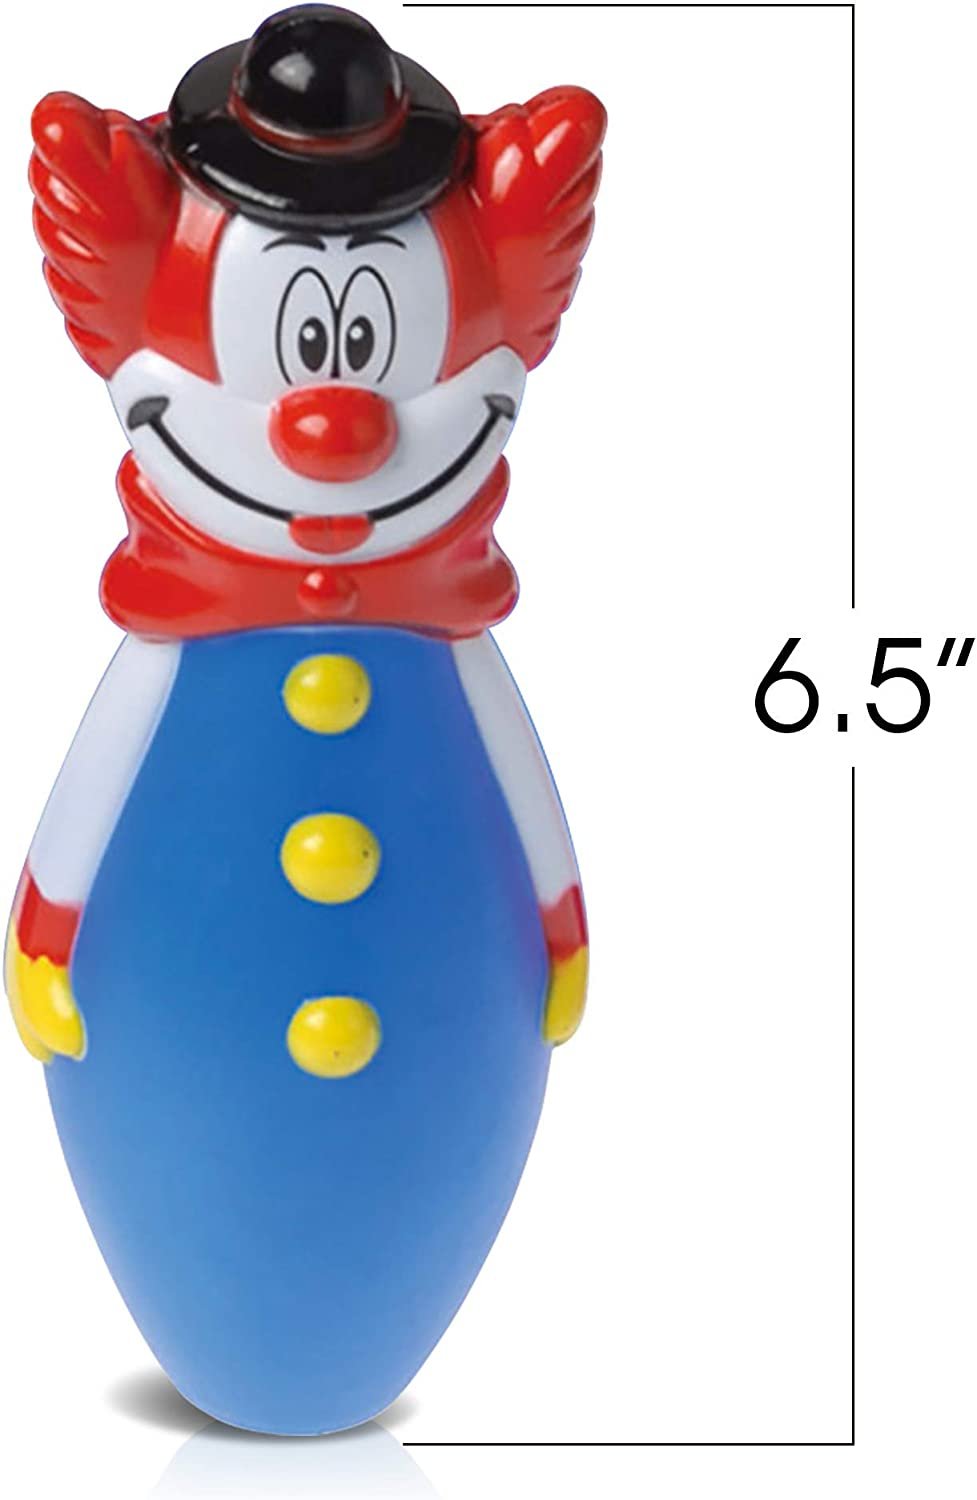 Gamie Clown Bowling Set for Kids - Includes 10 Pins and 2 Balls - Durable Plastic Indoor and Outdoor Game - Fun Carnival and Birthday Party Activity for Boys, Girls, Toddlers